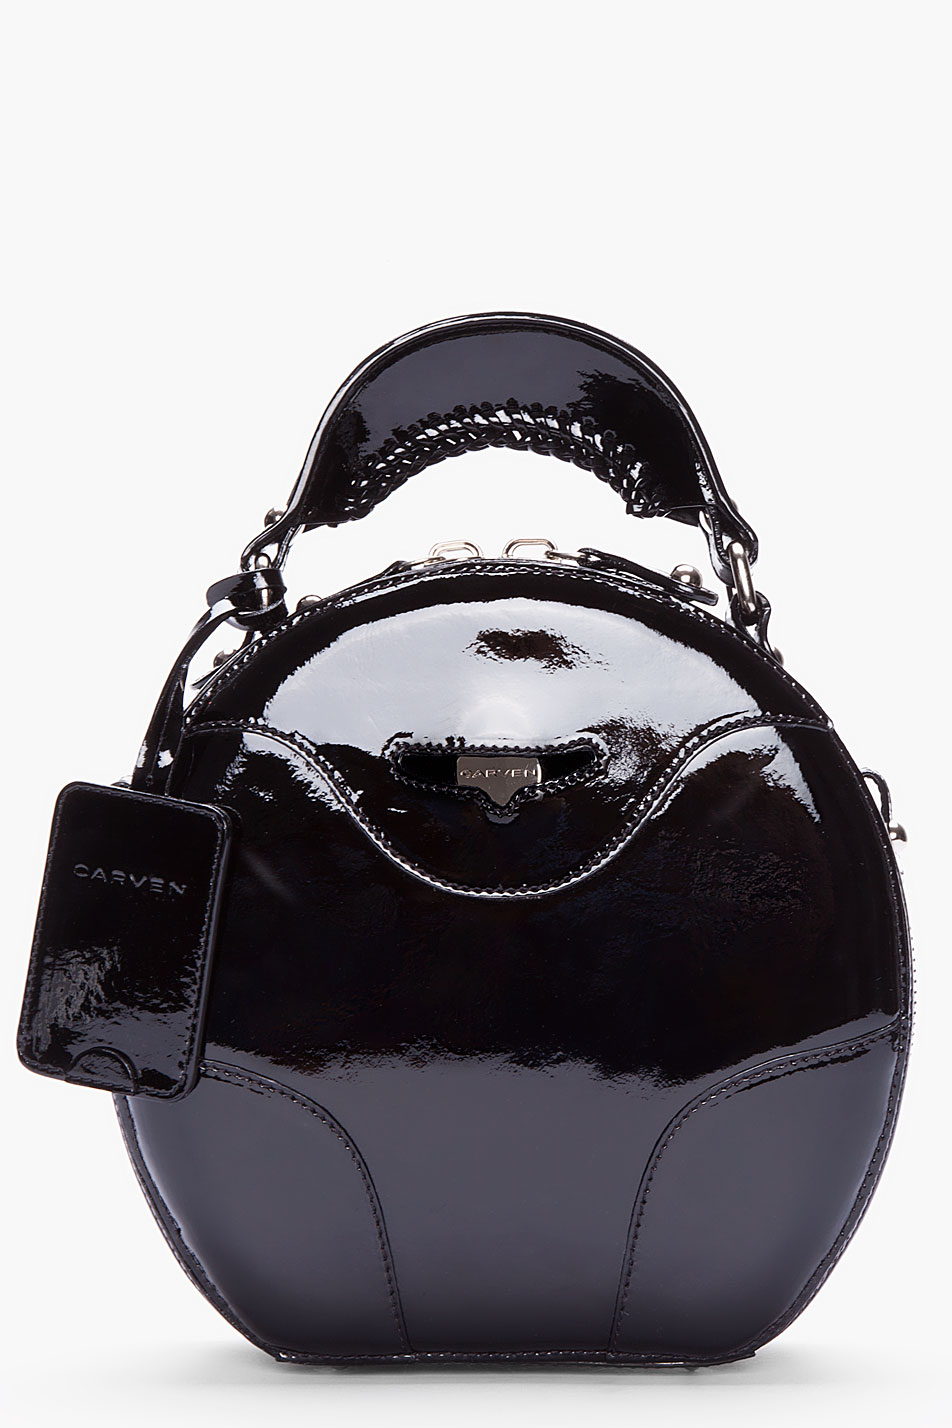 Black Patent Leather Handbags Only | Paul Smith